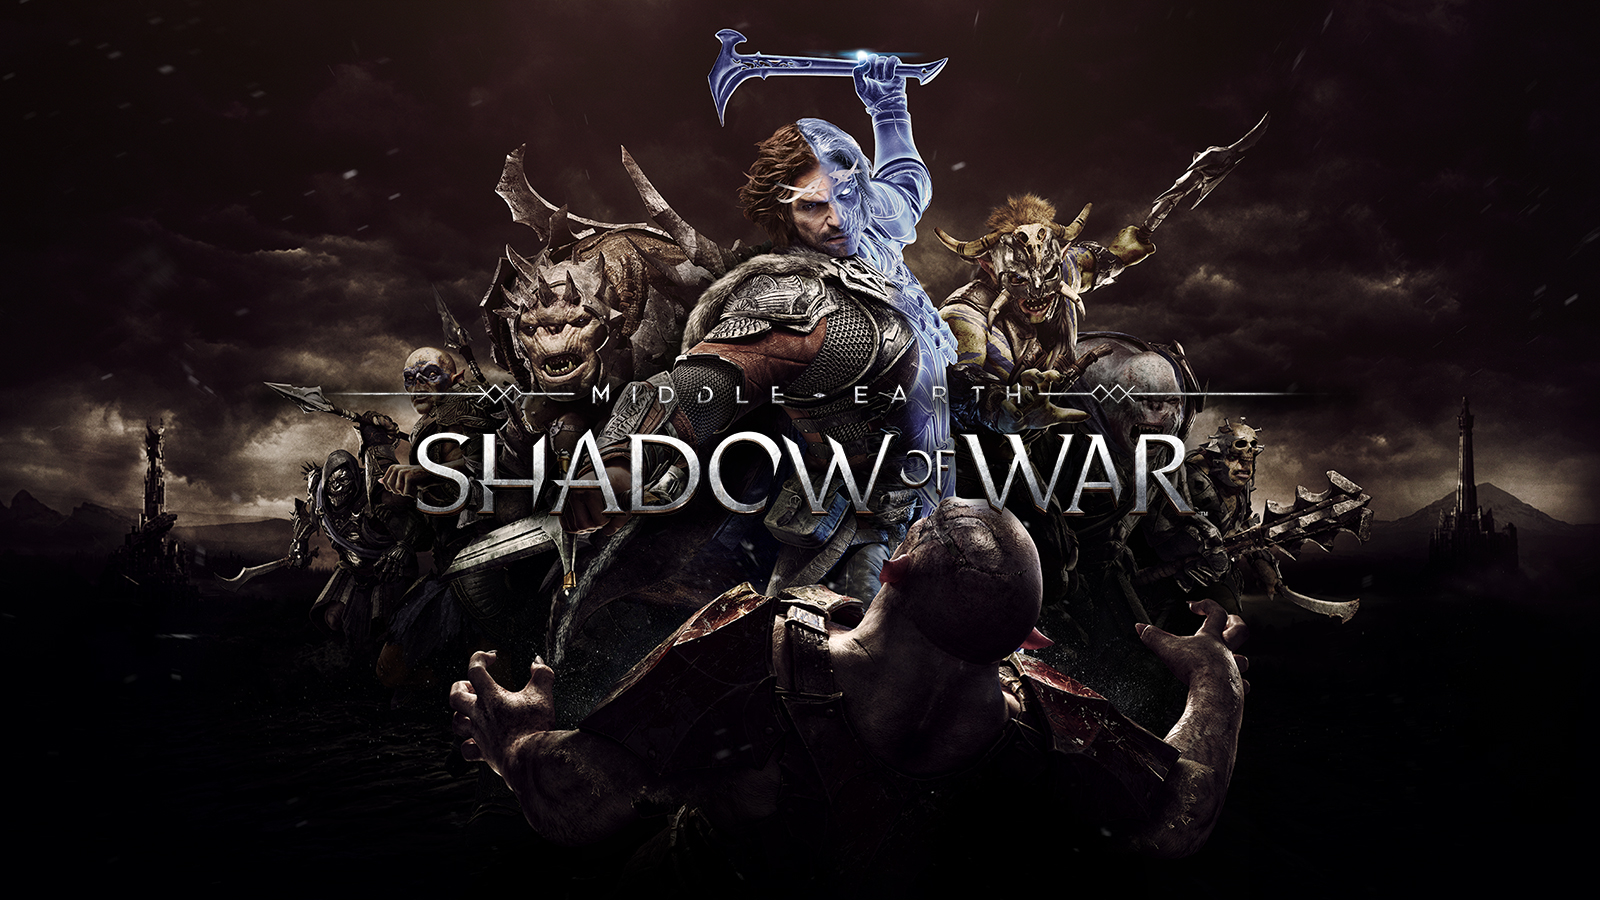 middle earth shadow of war listing thumb 01 ps4 us 17feb17 75zg Download Middle-earth Shadow of War for PC